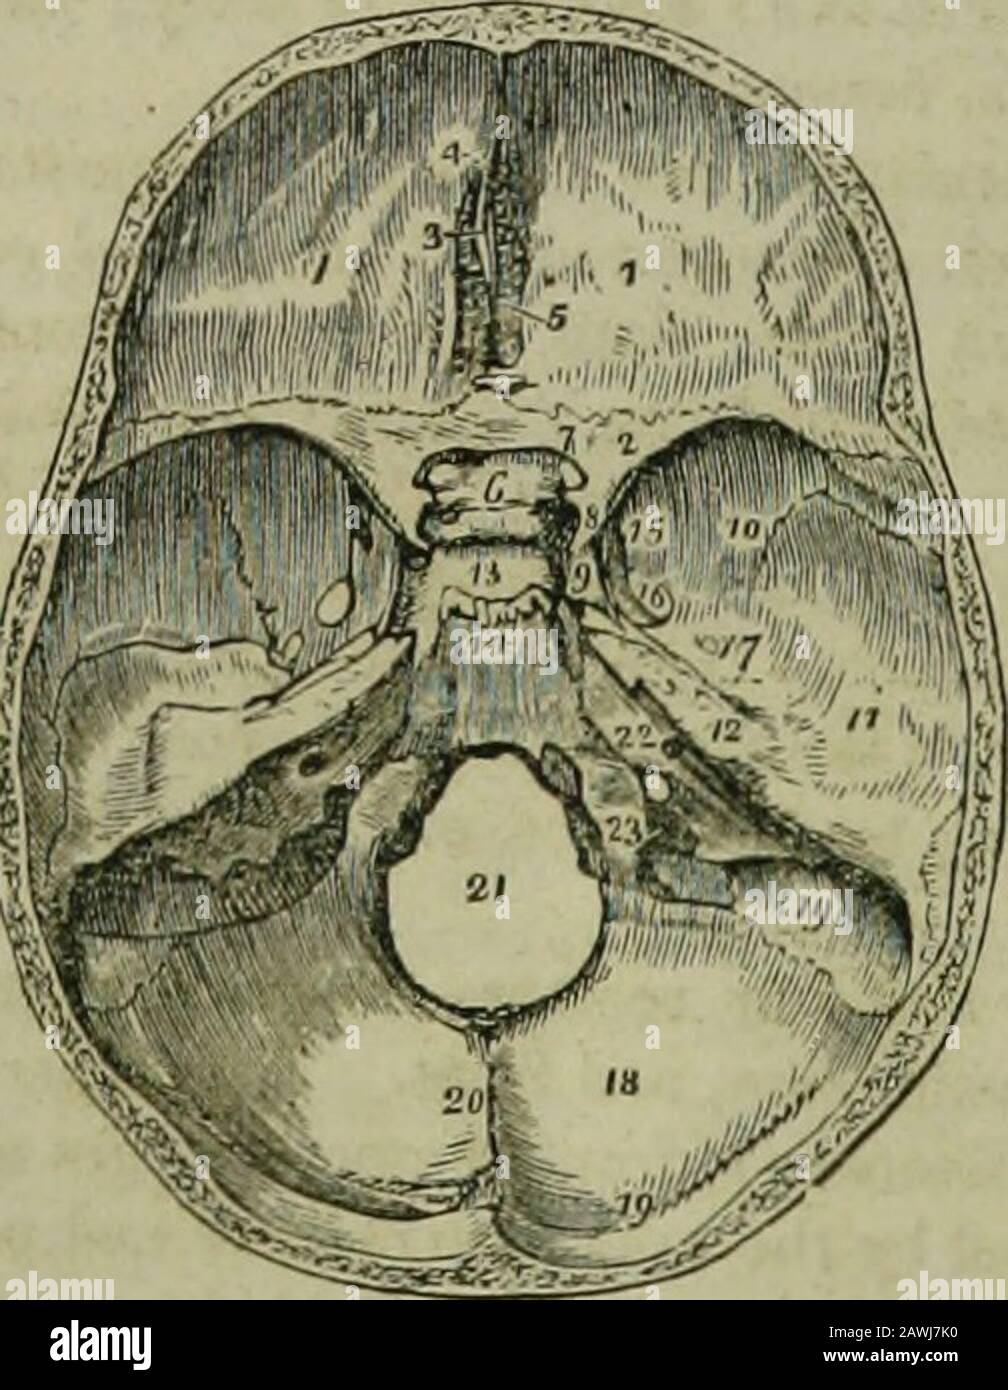 The hydropathic encyclopedia : a system of hydropathy and hygiene in eight parts ..designed as a guide to families and students, and a text-book for physicians . called olivary. 7.Foramen opticum. 8. Anterior clinoidprocess. 9. The Carotid groove on the ,side of the sella turcica, for the internalcarotid artery and cavernous sinus. 10,11, 12. Middle fossa of the base of theskull: 10 marks the great ala of the sphe-noid ; 11, the squamous portion of thetemporal bone; 12, the petrous portion.13. The sella turcica. 14. liasilar portionof sphenoid and occipital bones. Theuneven ridge between 13 an Stock Photo